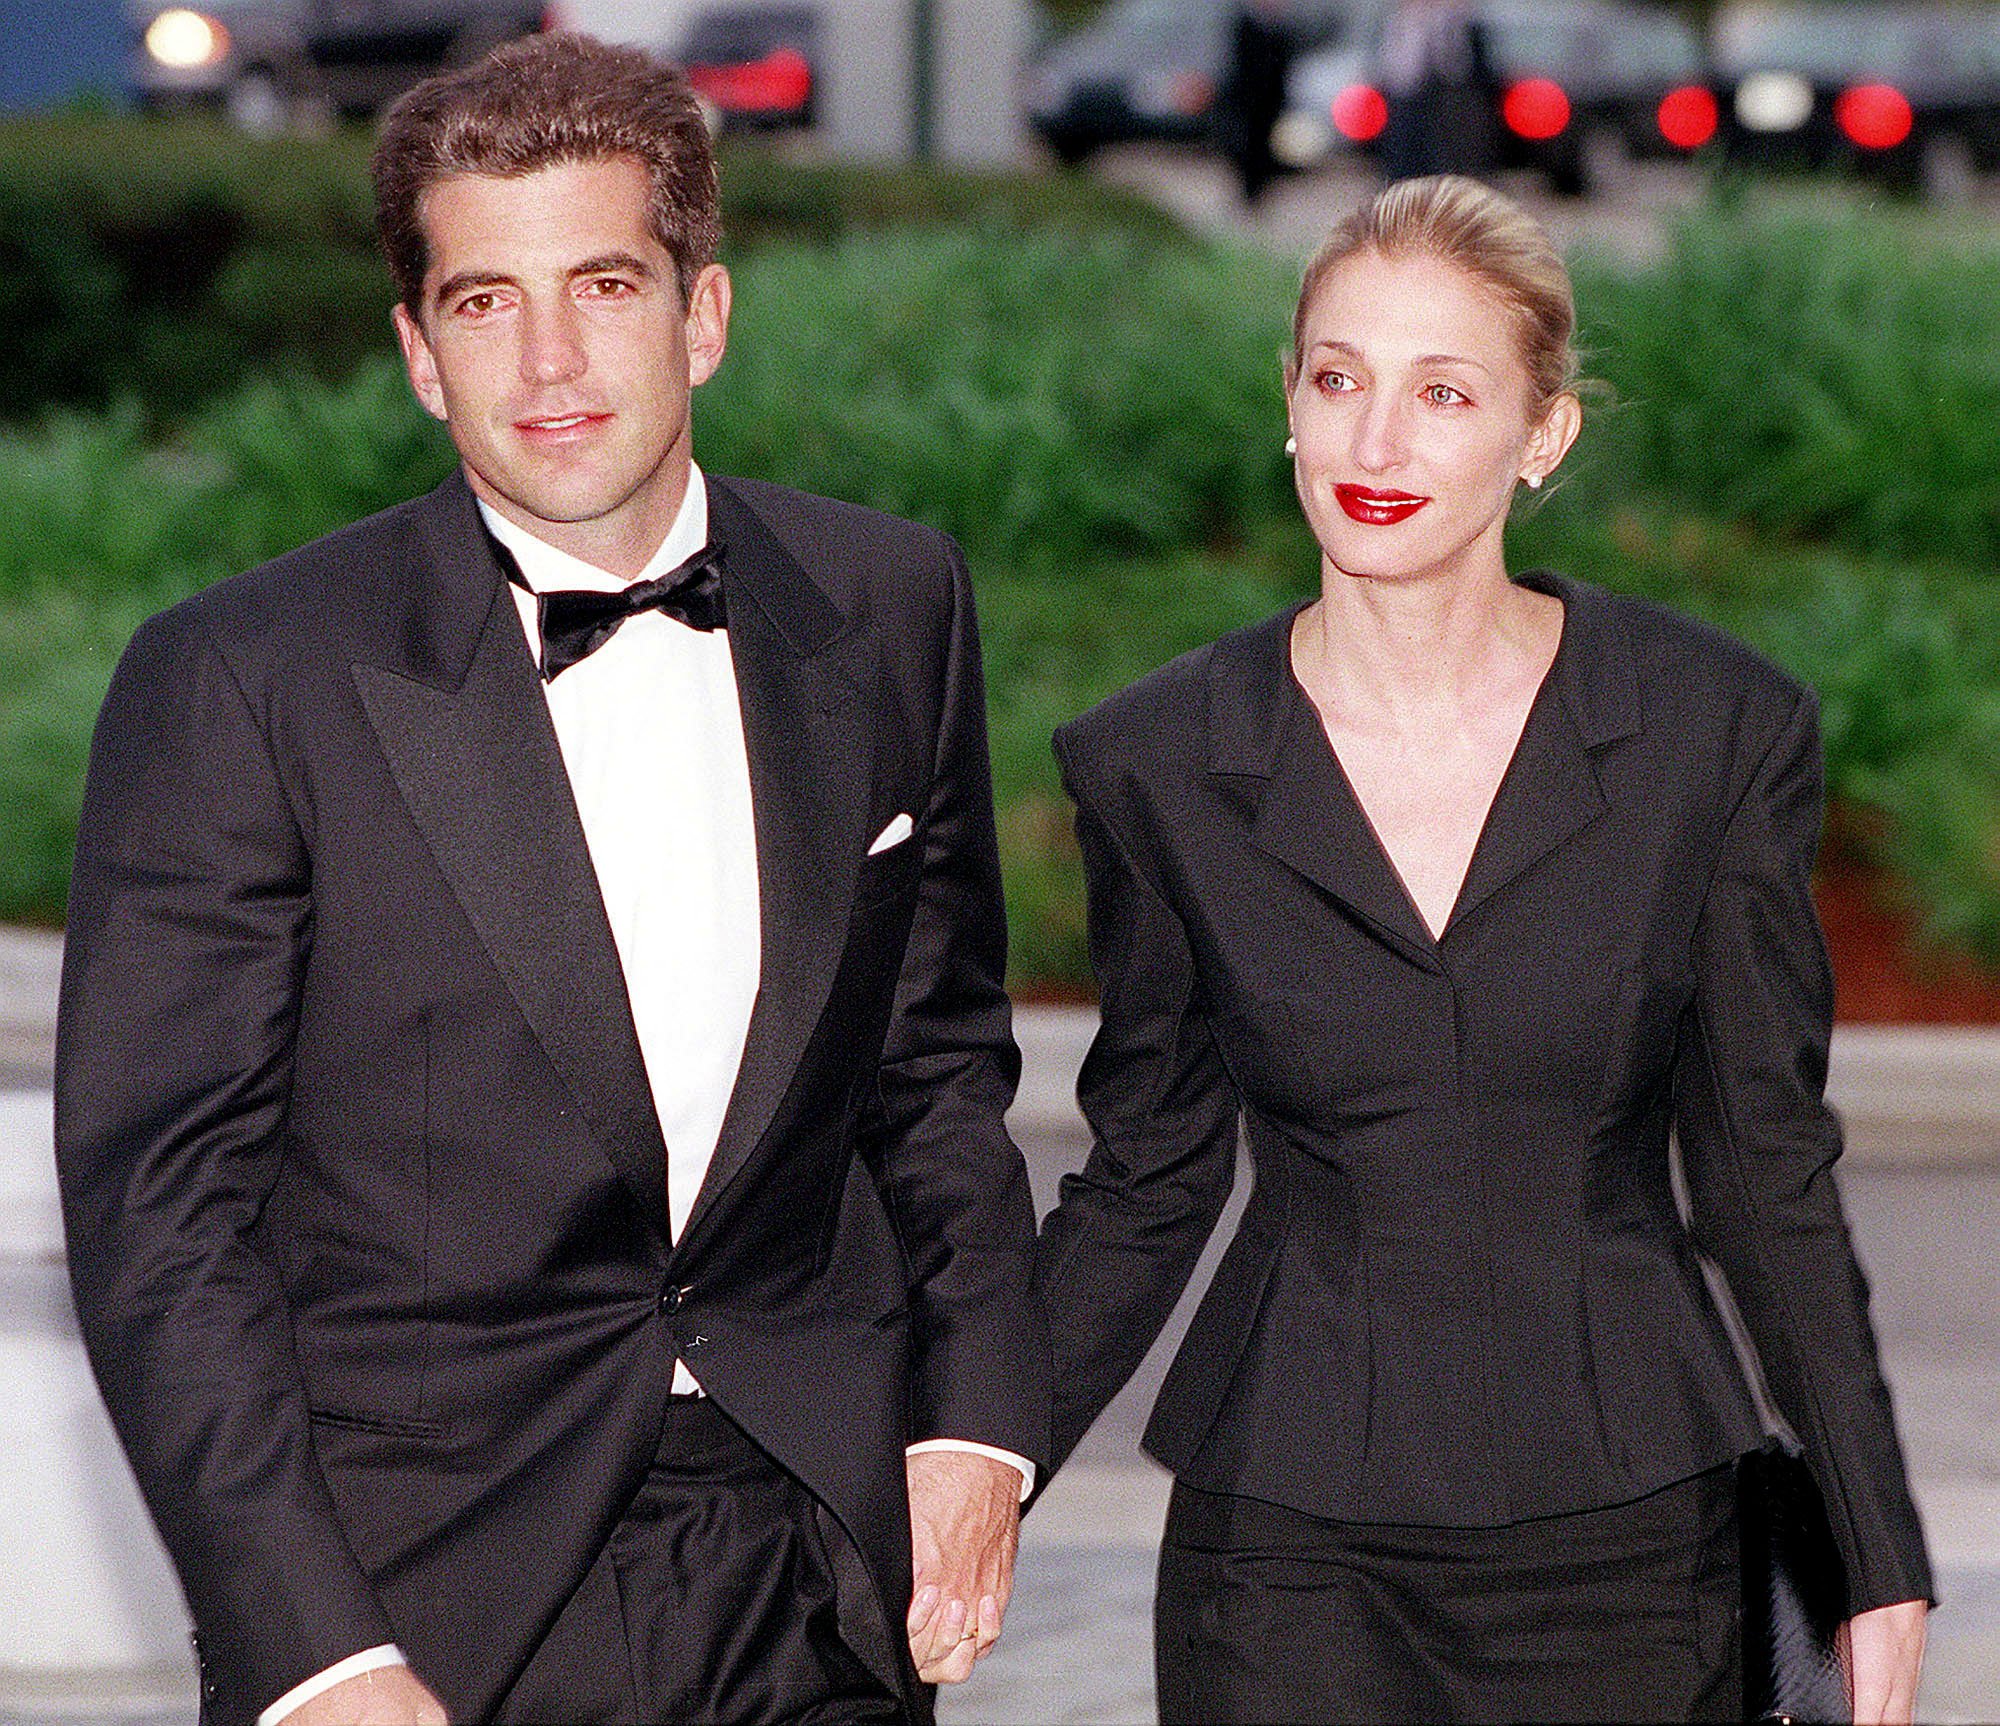 John F. Kennedy, Jr. and his wife Carolyn Bessette Kennedy arrive at the annual John F. Kennedy Library Foundation dinner and Profiles in Courage awards on May 23, 1999, in Boston, MA. | Source: Getty Images.